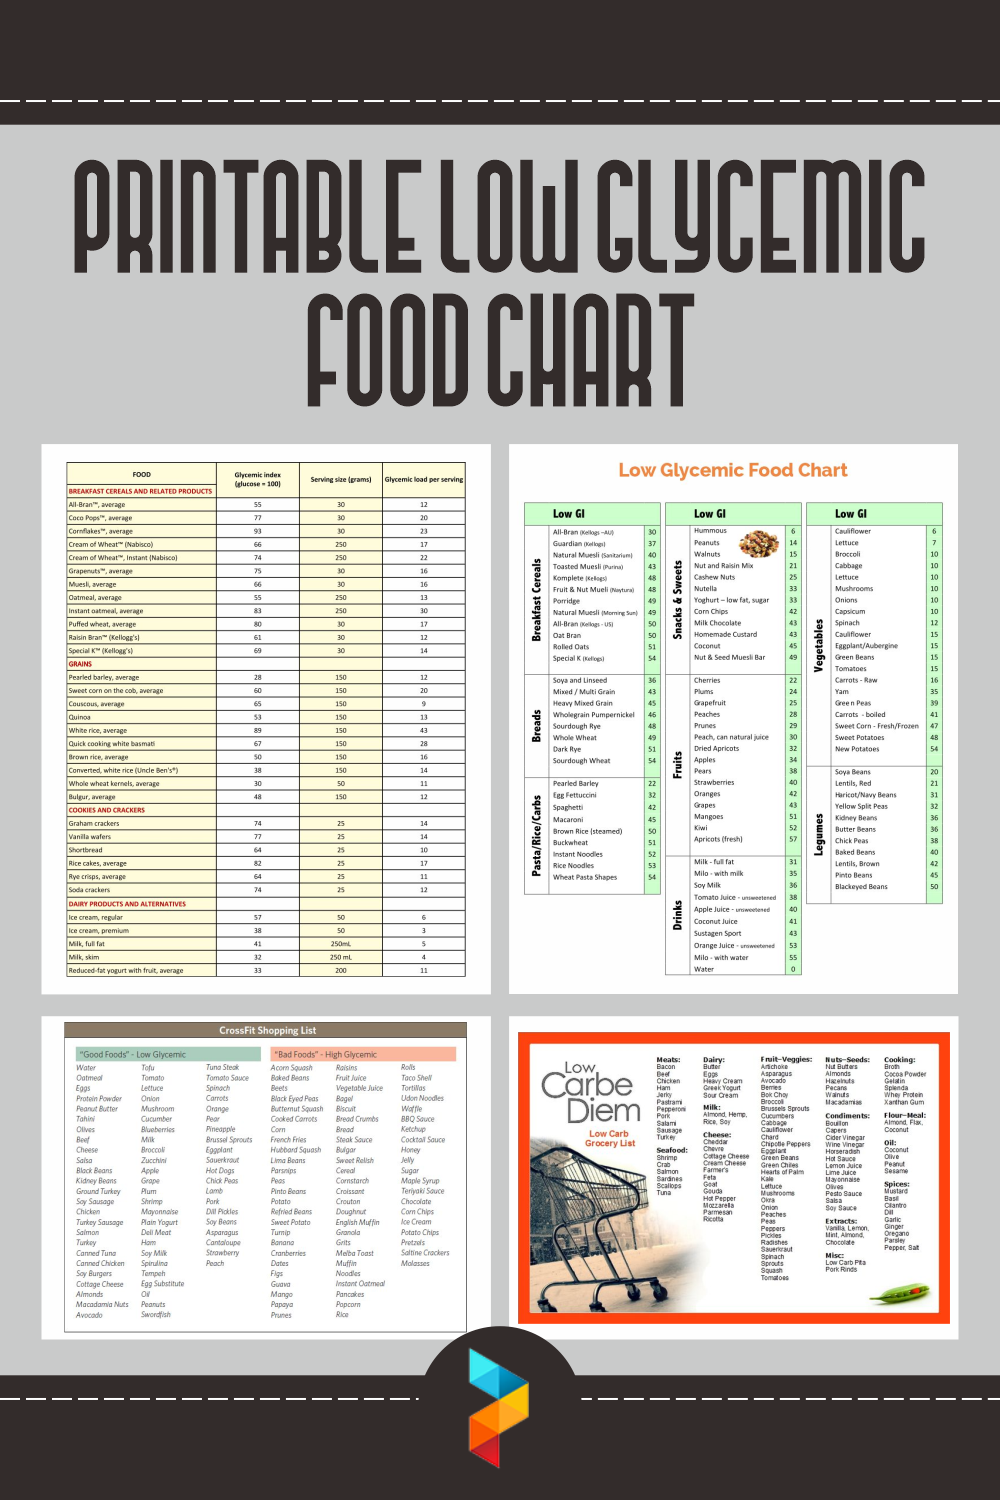 Printable Low Glycemic Food Chart Design_26890